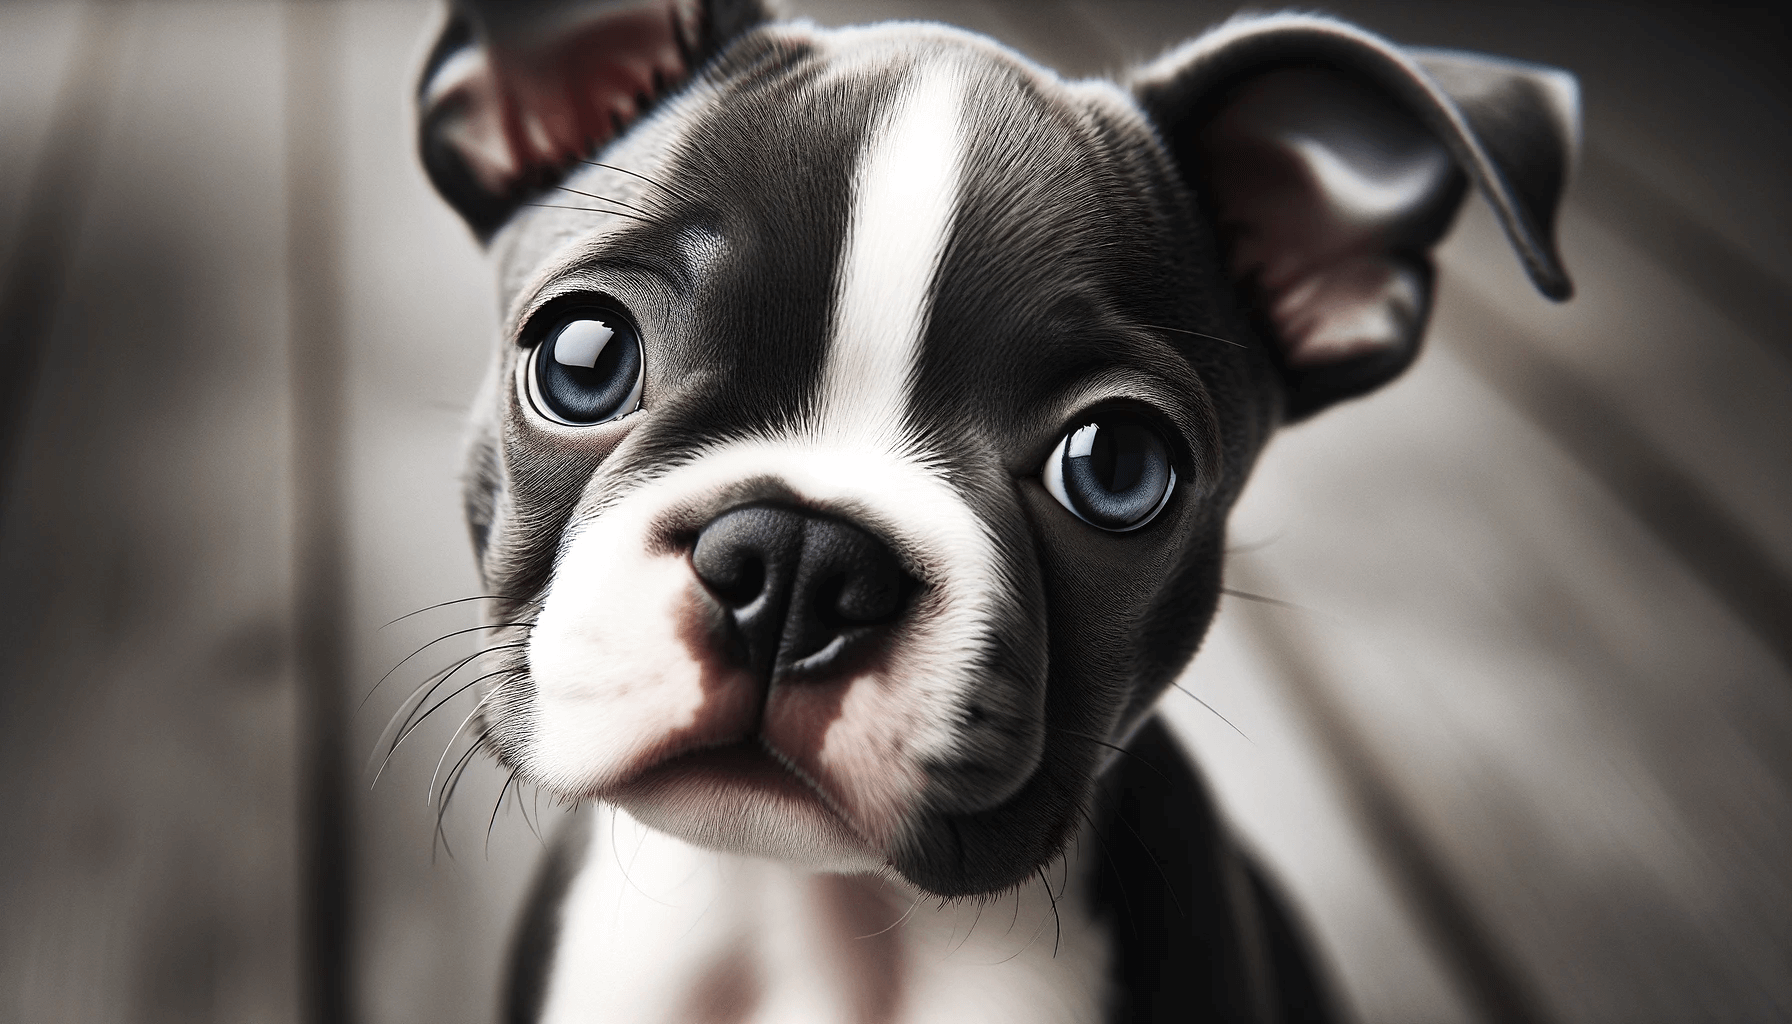 The face of a sweet Blue Boston Terrier puppy with prominent blue-grey and white markings, looking directly at the camera with a sweet and innocent expression.